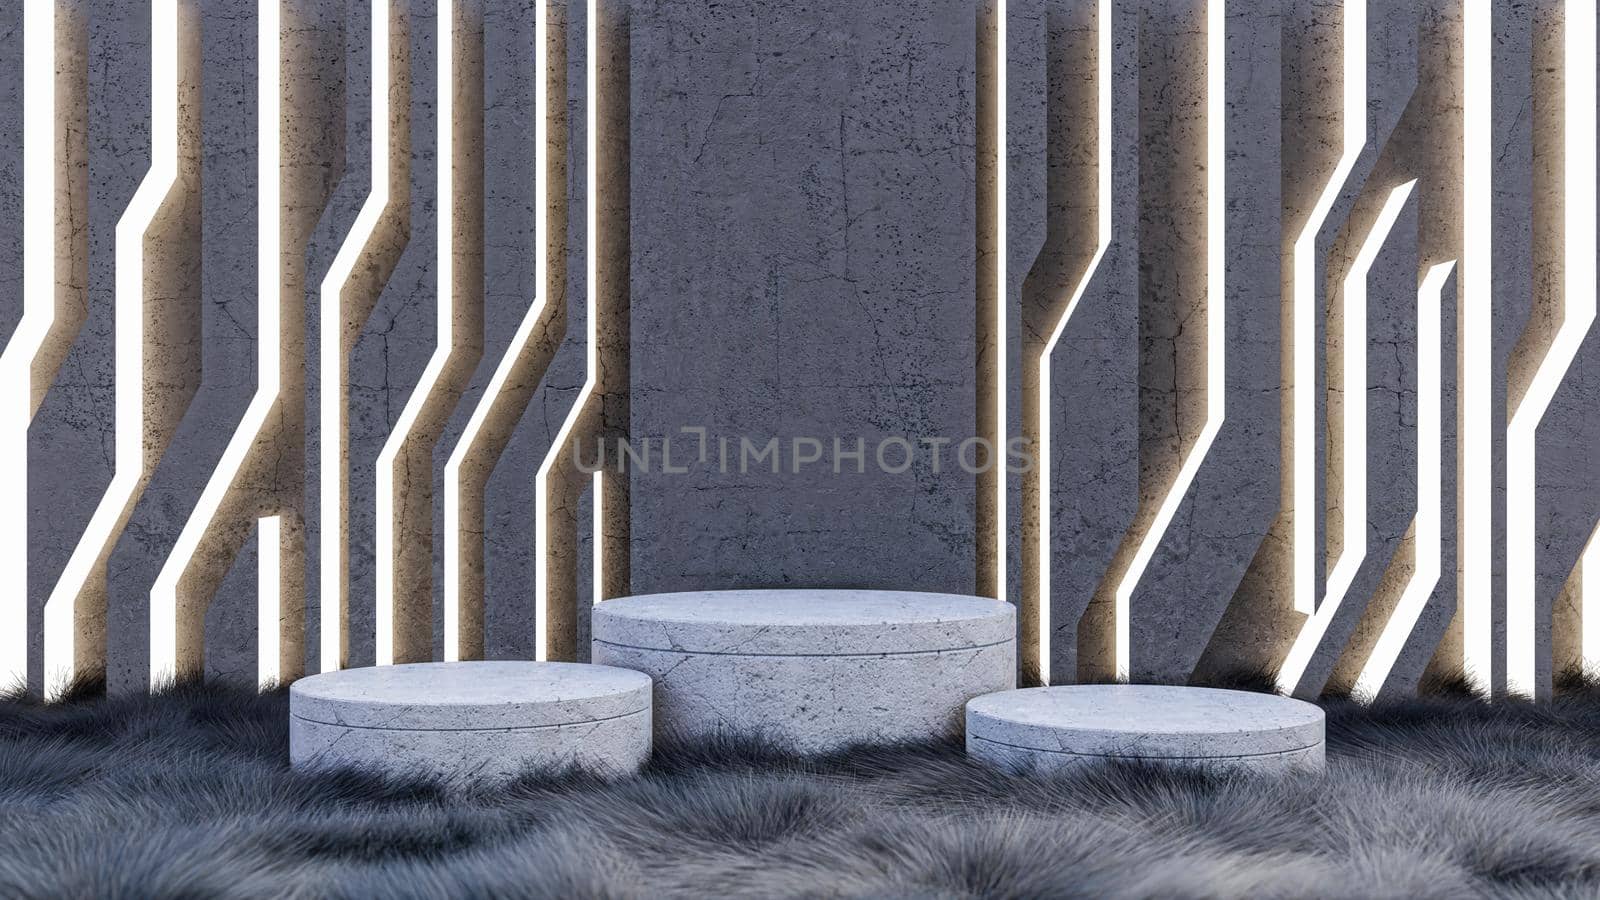 A 3d rendering image of product display on black fur floor and cracked concrete wall